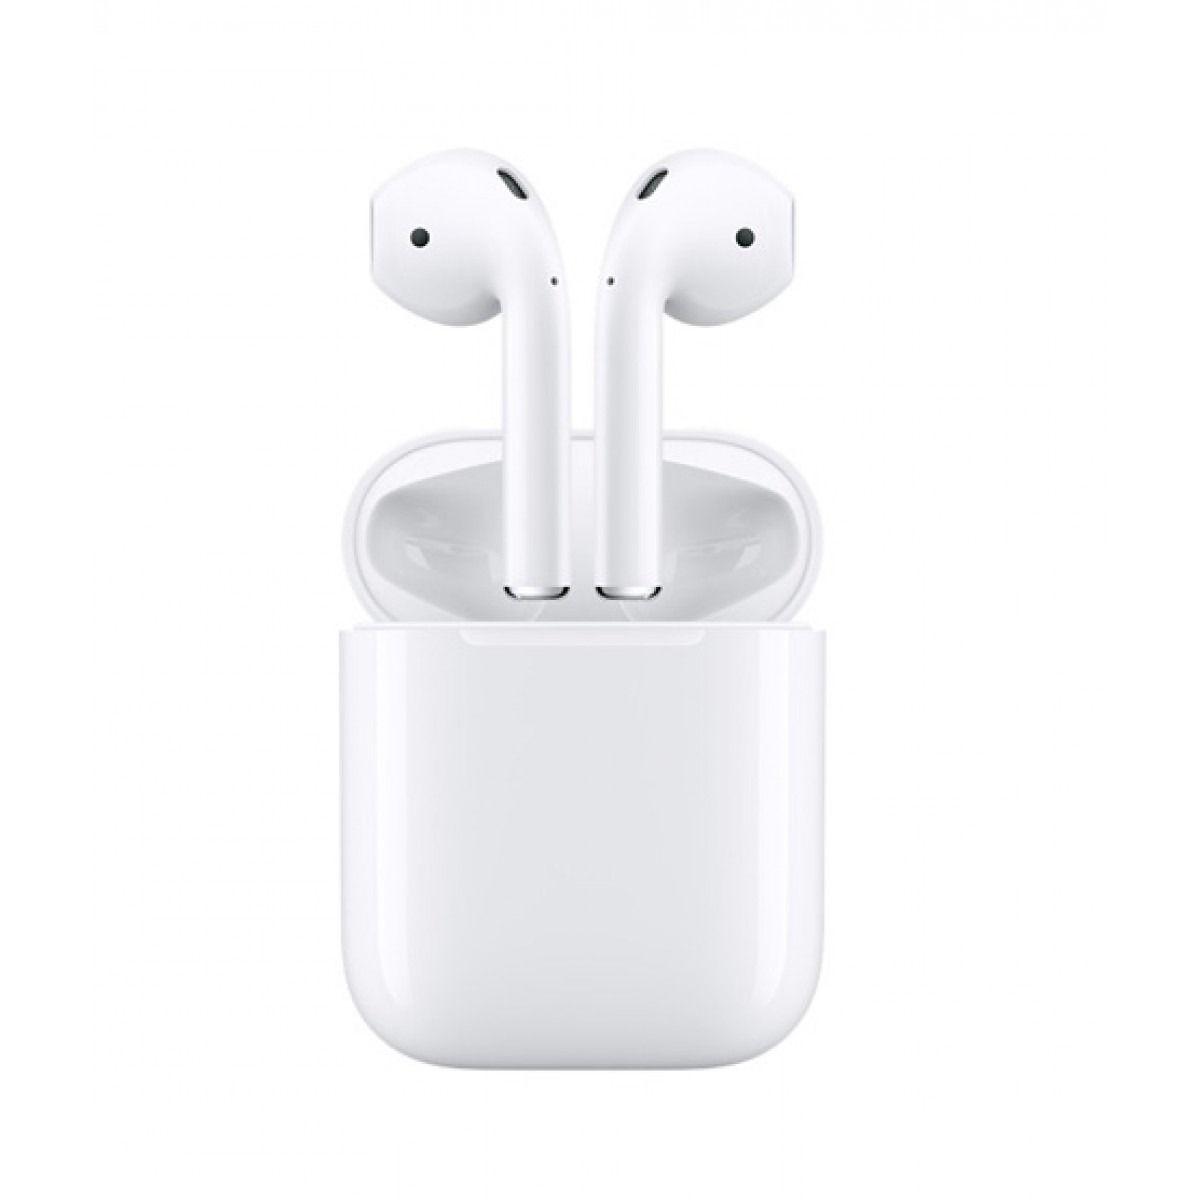 Apple AirPods Price in Pakistan. Buy Apple AirPods